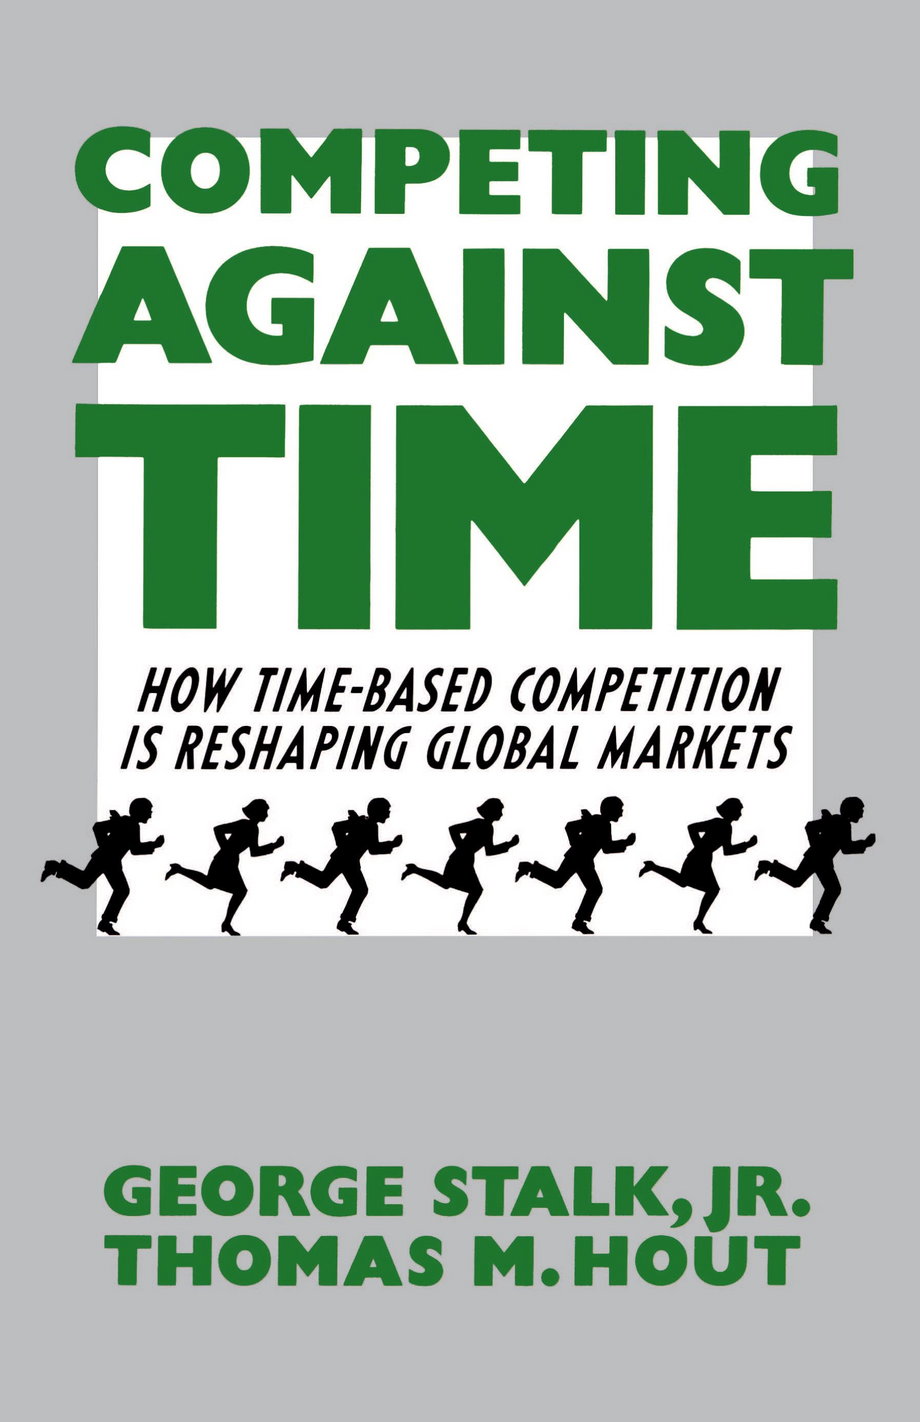 Apple CEO Tim Cook is a huge fan of "Competing Against Time," by George Stalk Jr. It's about managing supply chains to get a competitive boost — something Apple has to worry about a lot.